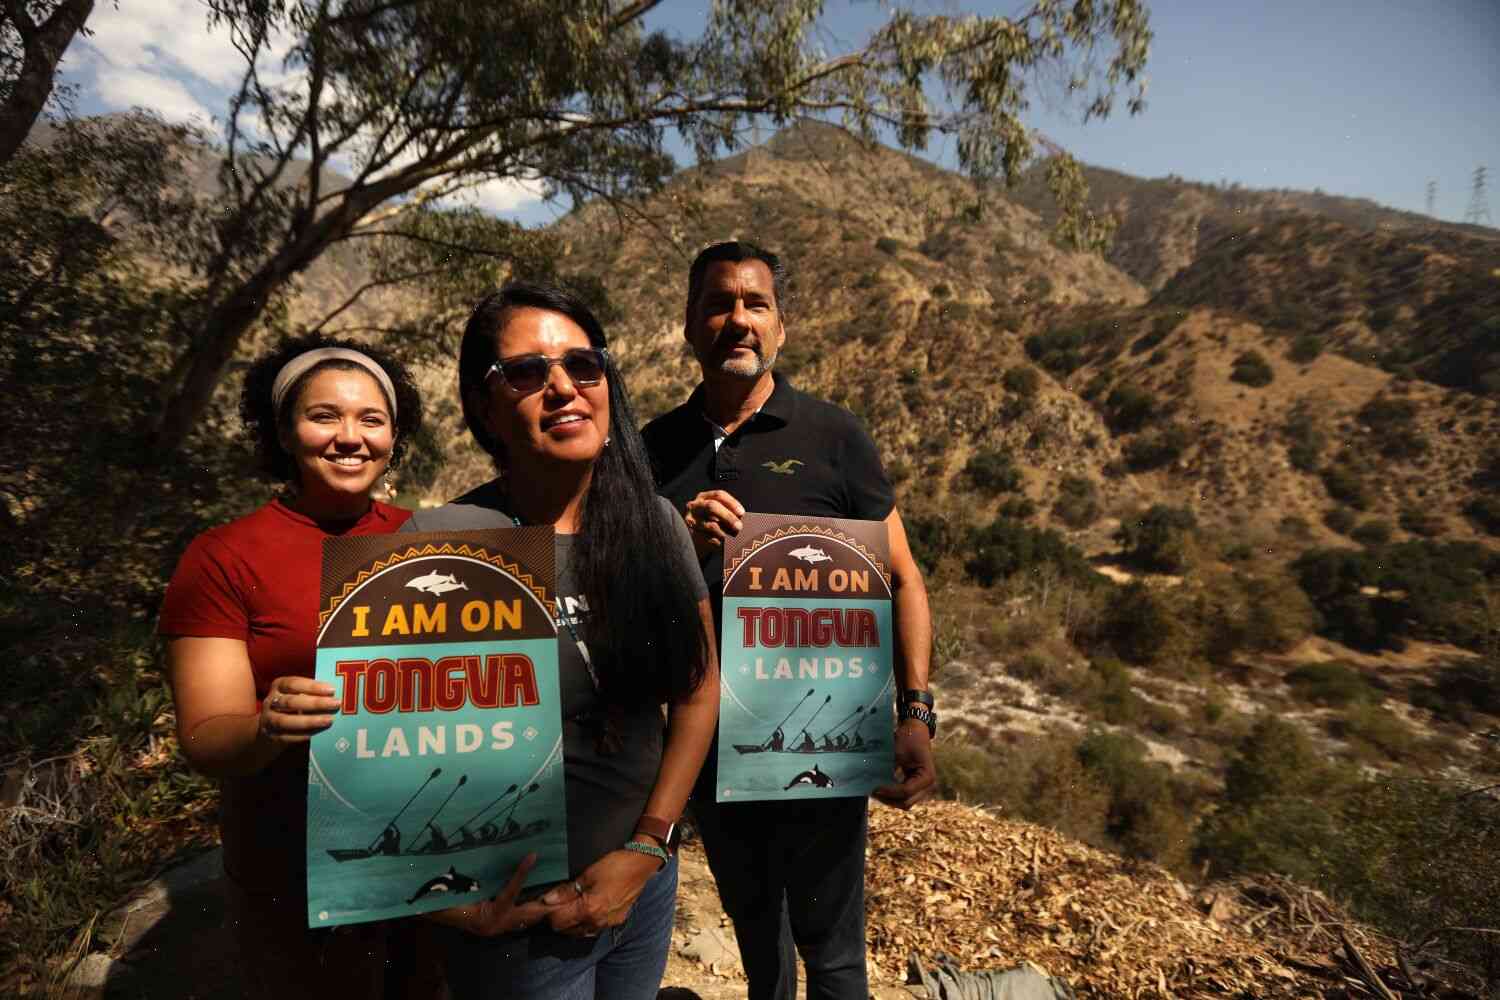 Los Angeles residents protest the relocation of a controversial LA County reservoir project